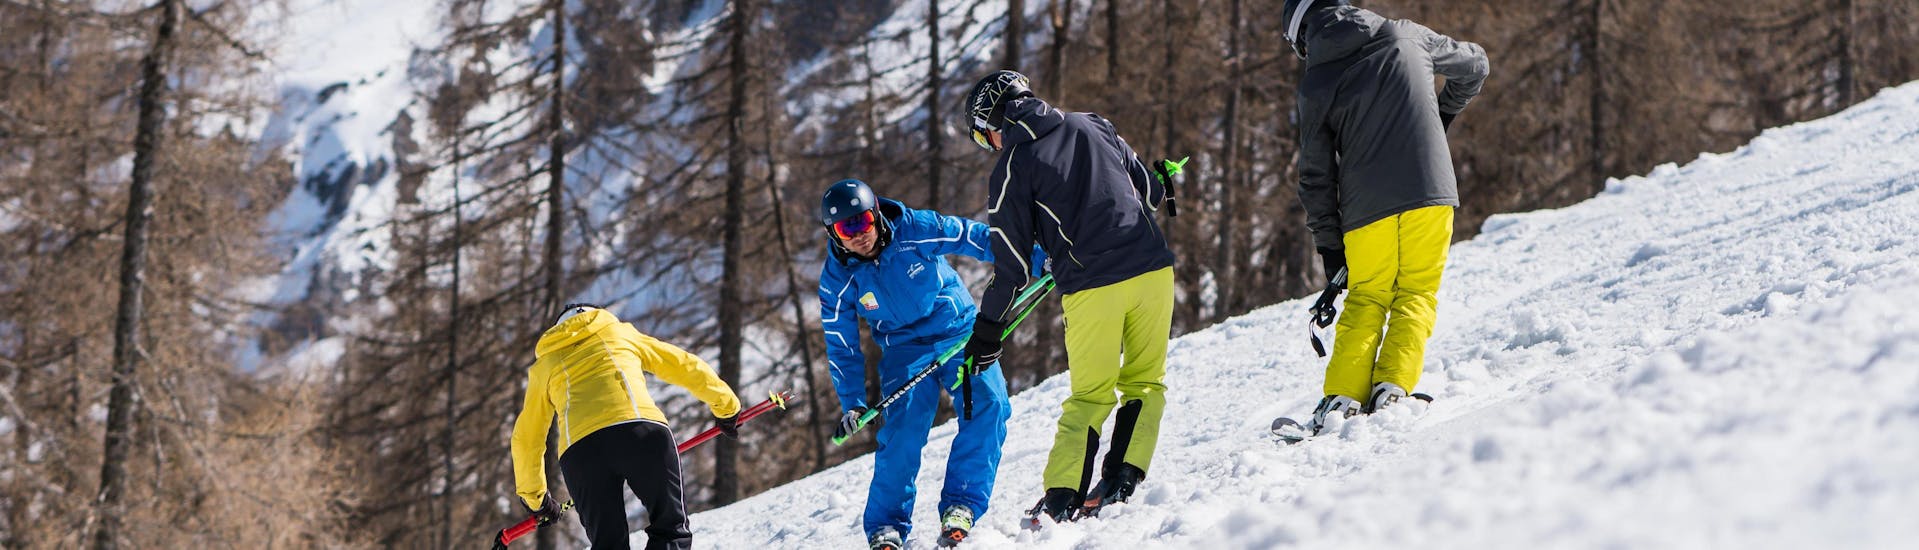 Private Ski Lessons for Adults of All Levels.